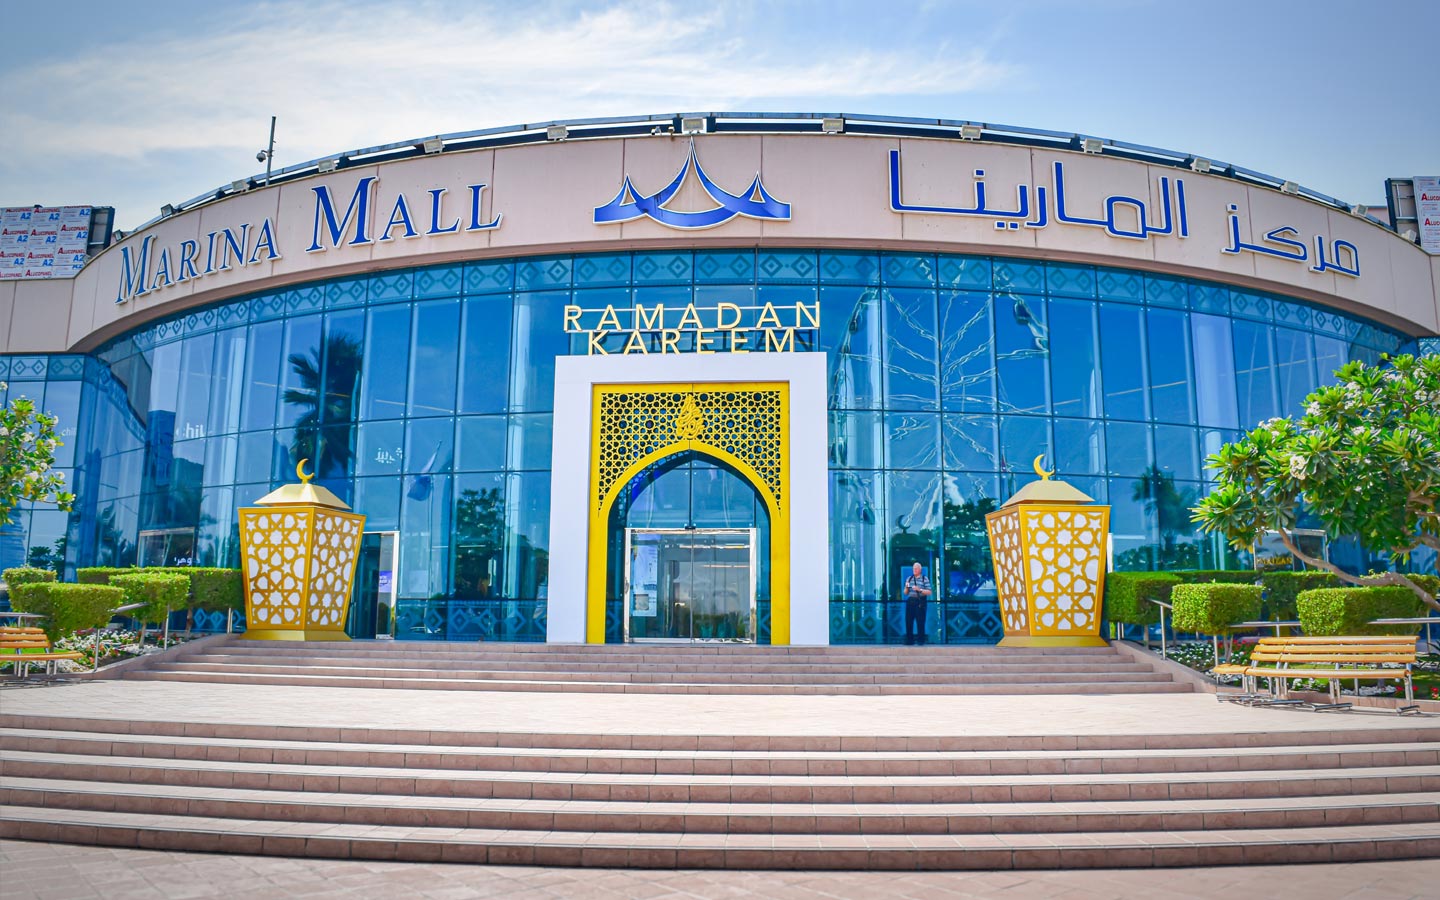 Marina Mall lies on the route of ART buses